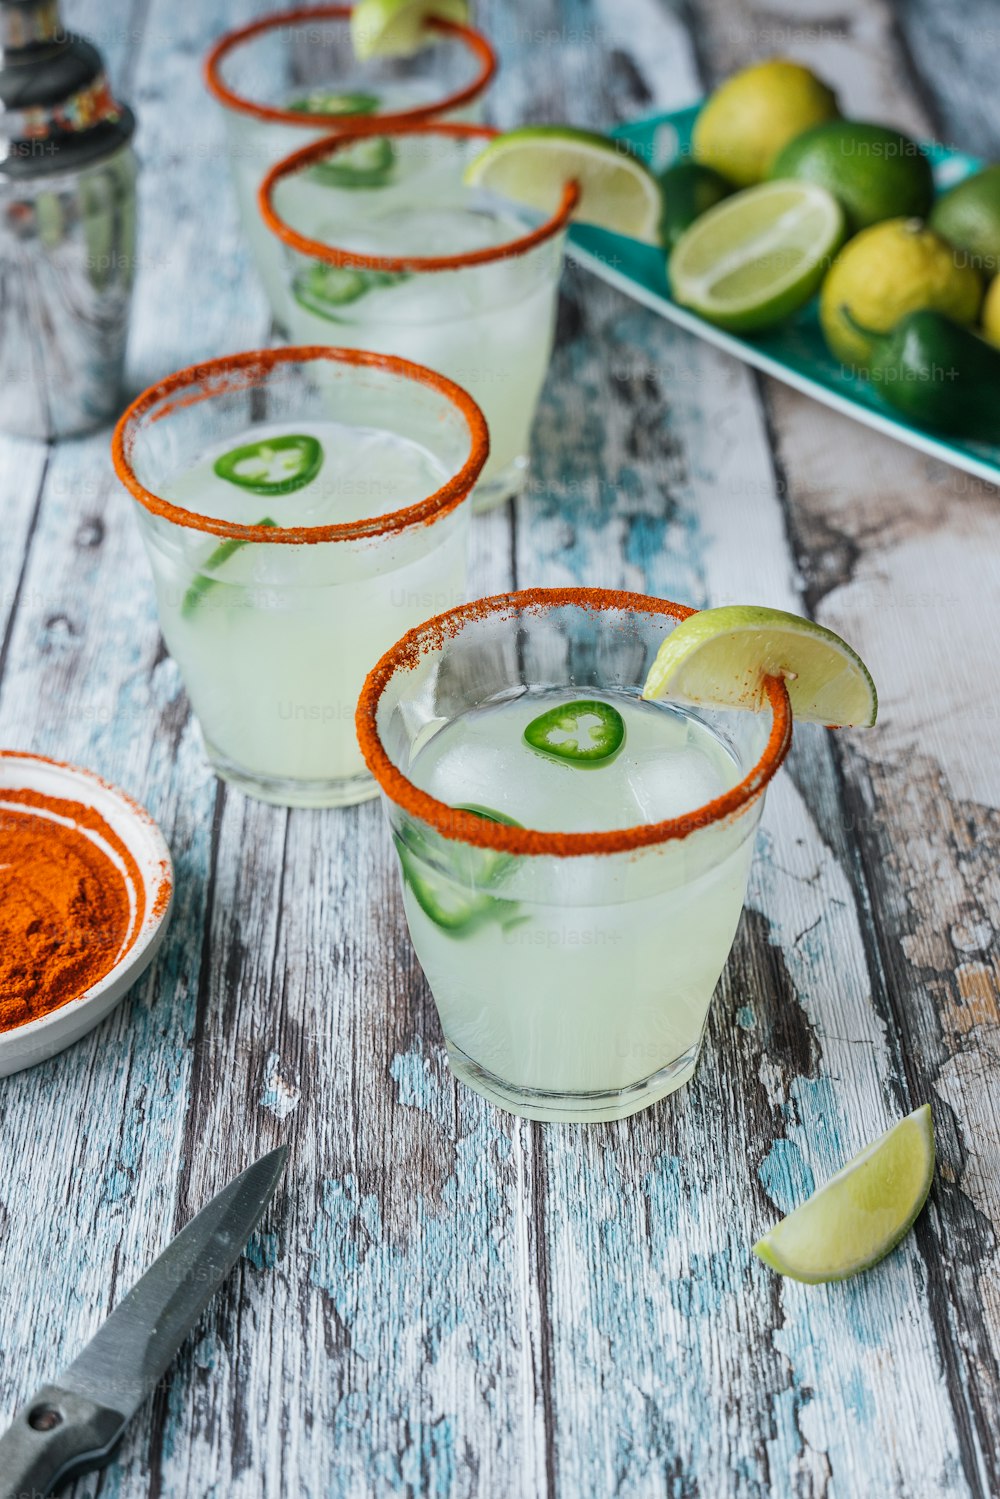 three glasses of margarita margaritas with limes and limes in the background